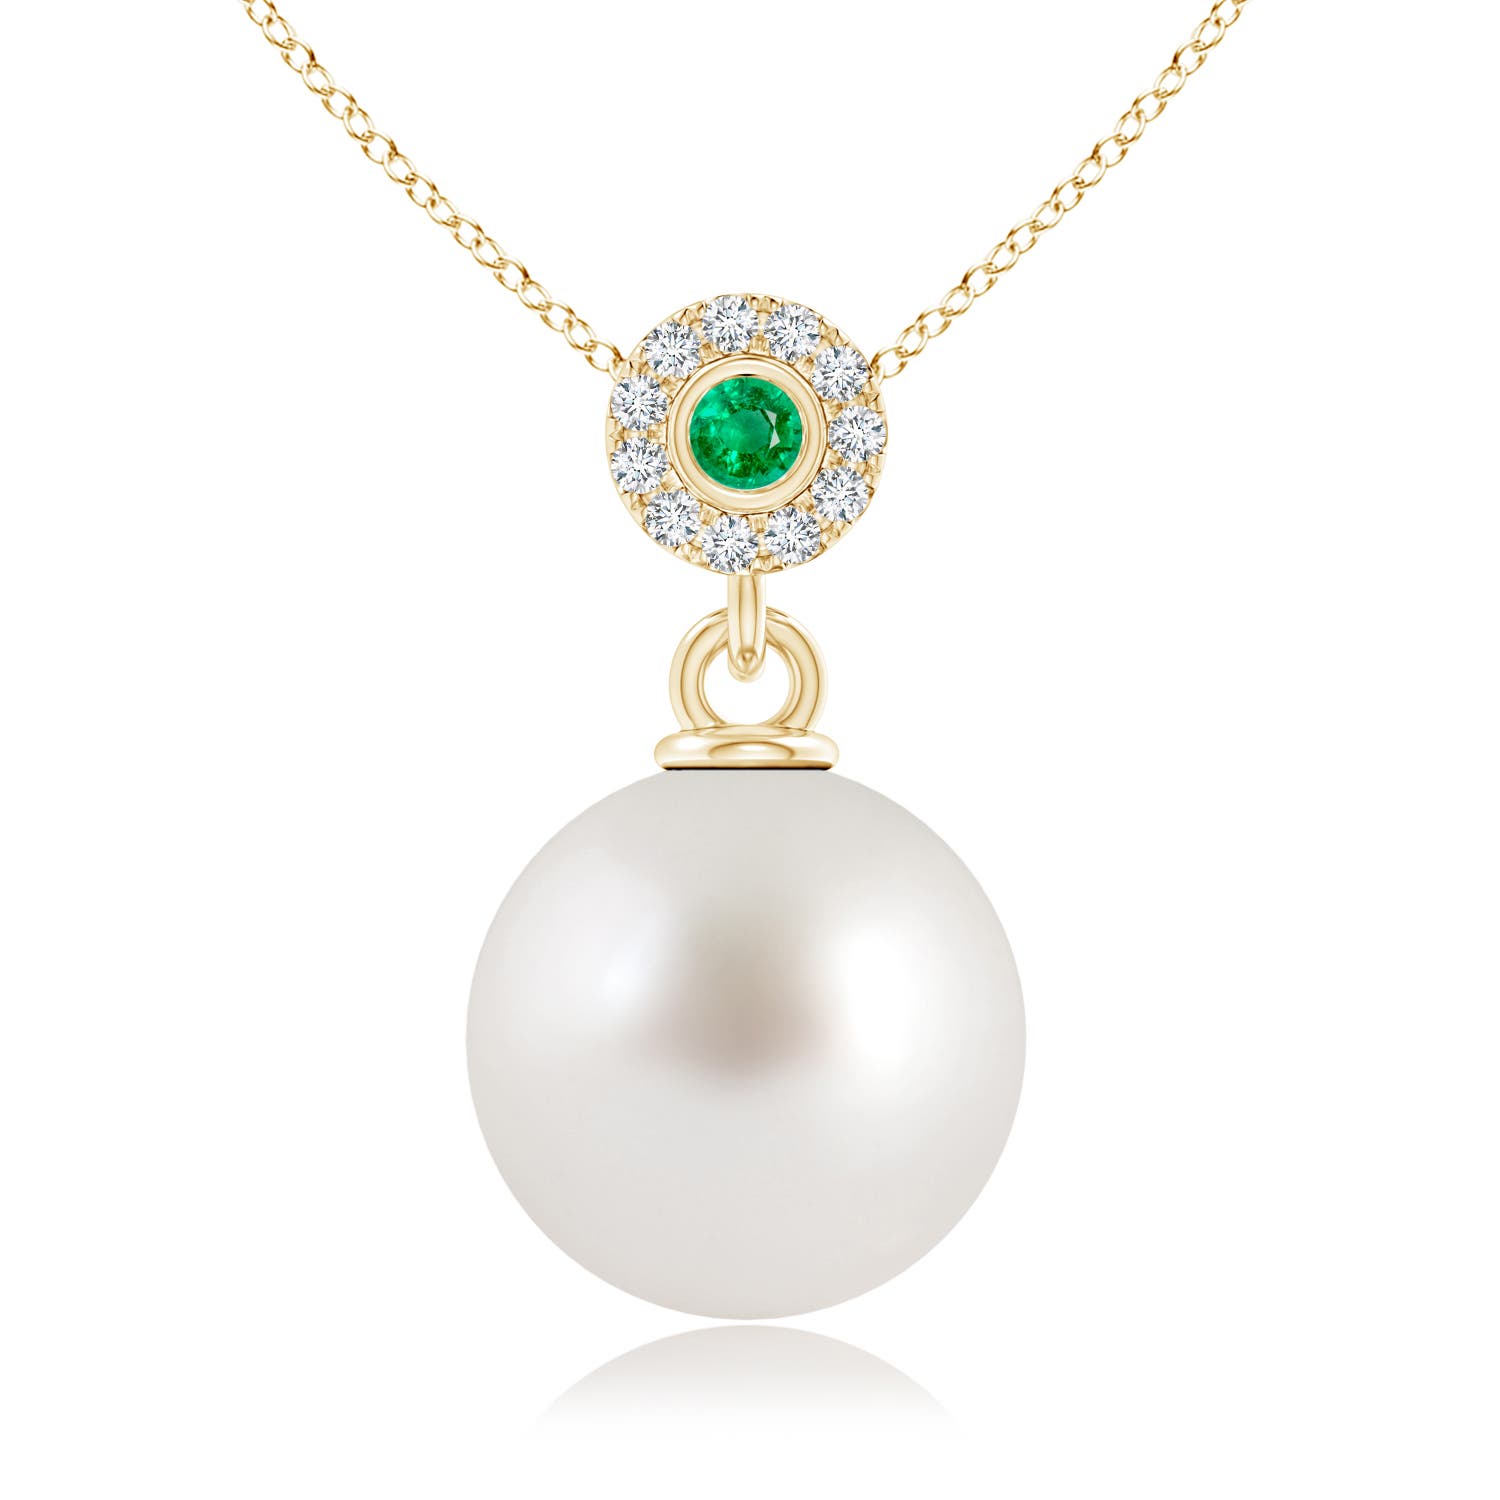 AAA - South Sea Cultured Pearl / 7.3 CT / 14 KT Yellow Gold